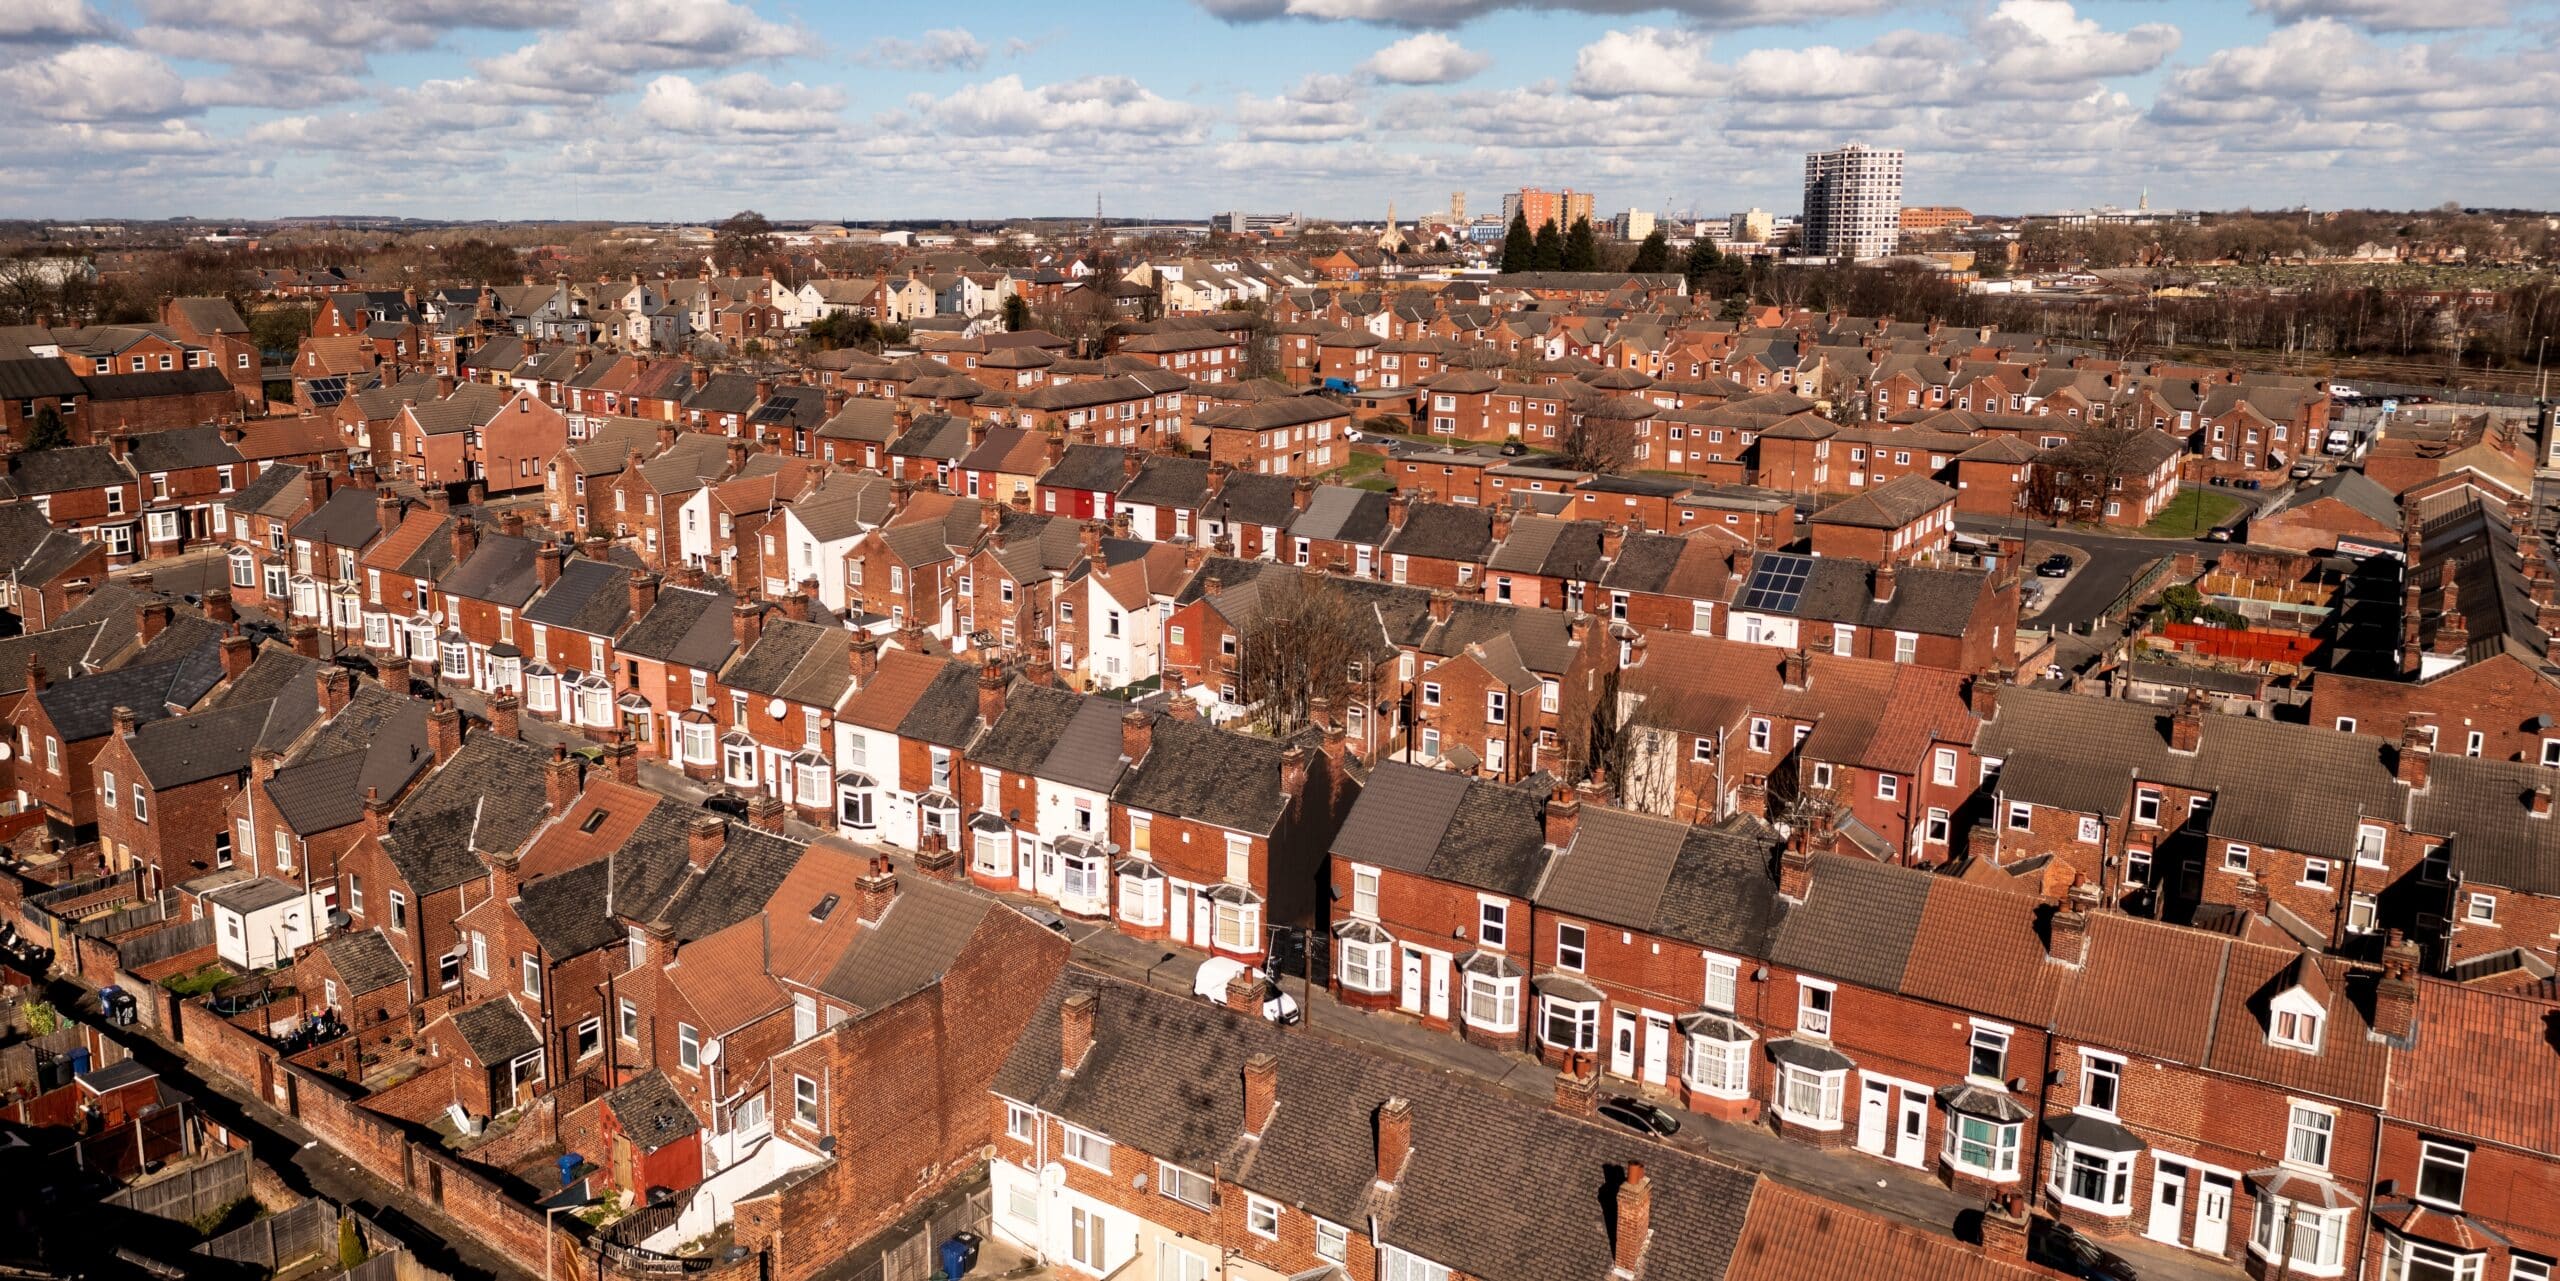 <strong>Is There a Buy-to-Let Market in Doncaster?</strong>